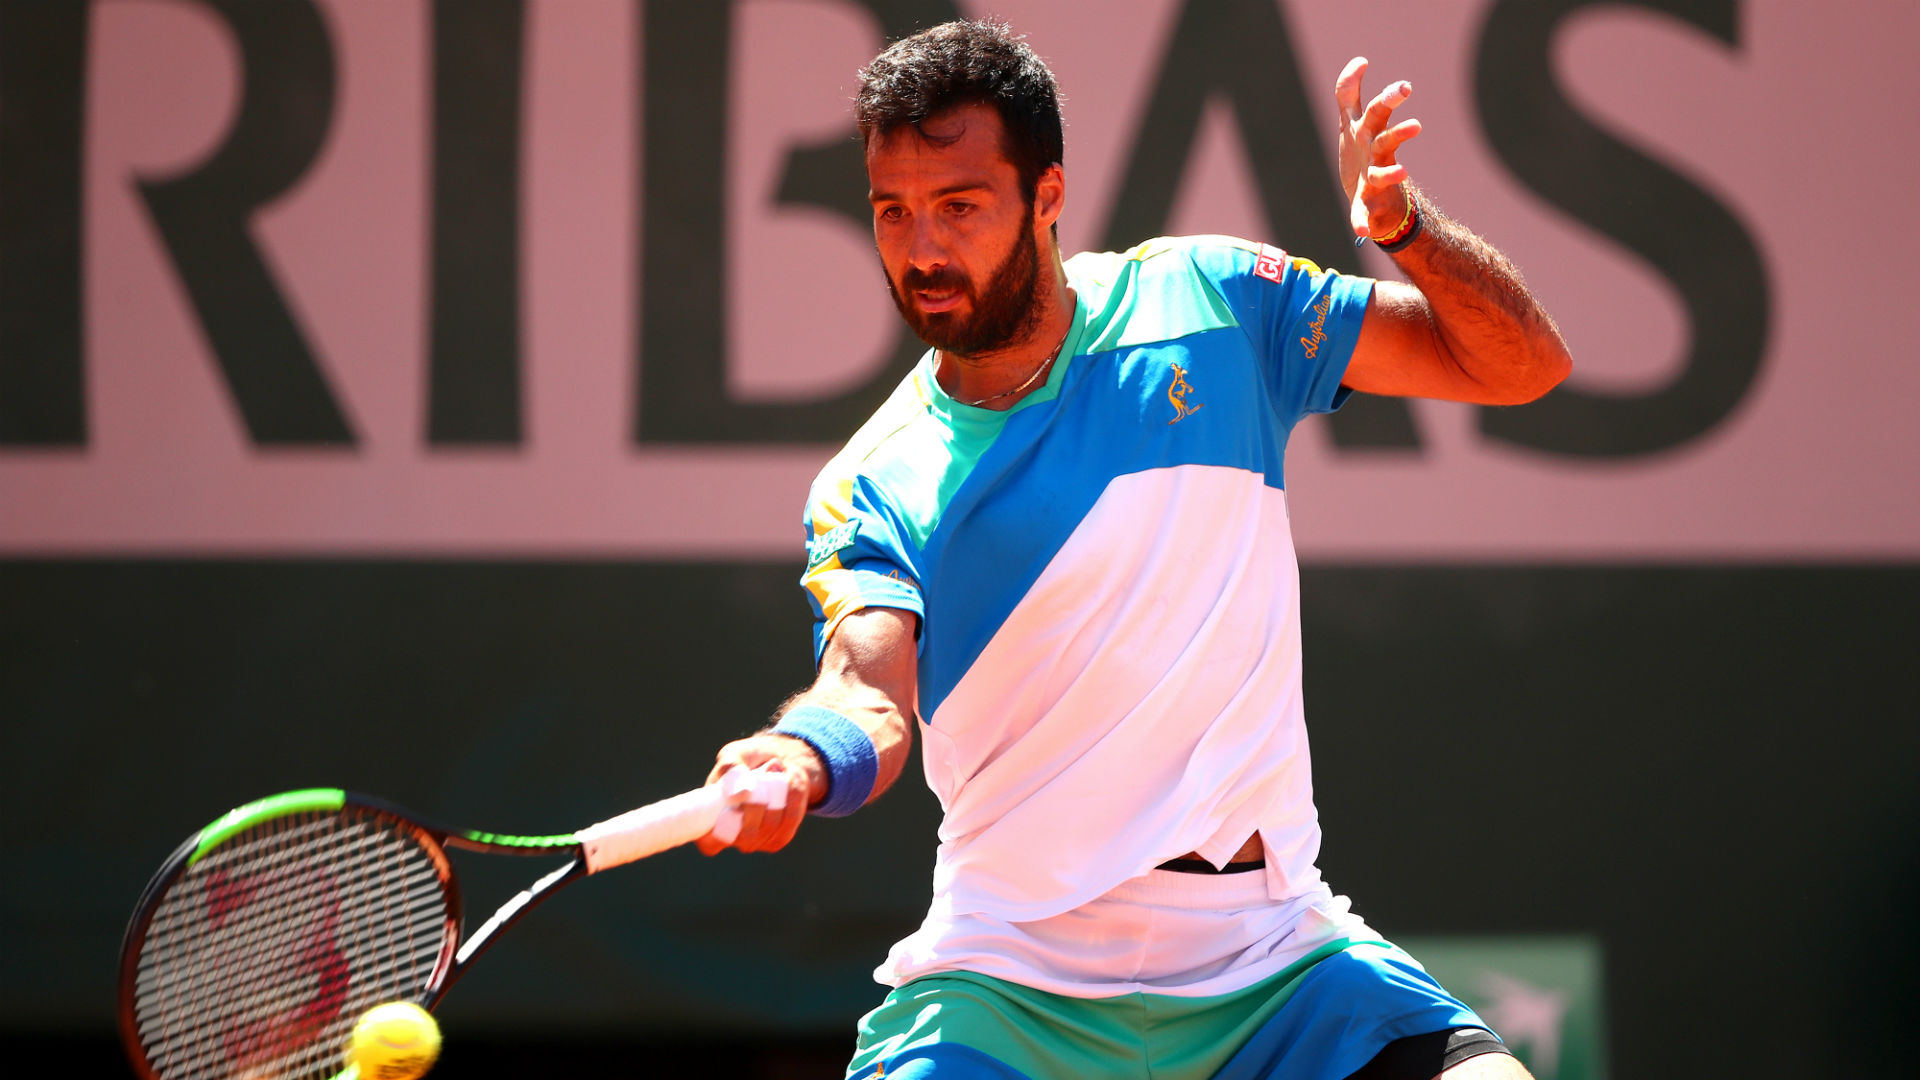 Italian qualifier Salvatore Caruso ripped up the script in Umag, beating world number 14 Borna Coric to reach the quarter-finals.